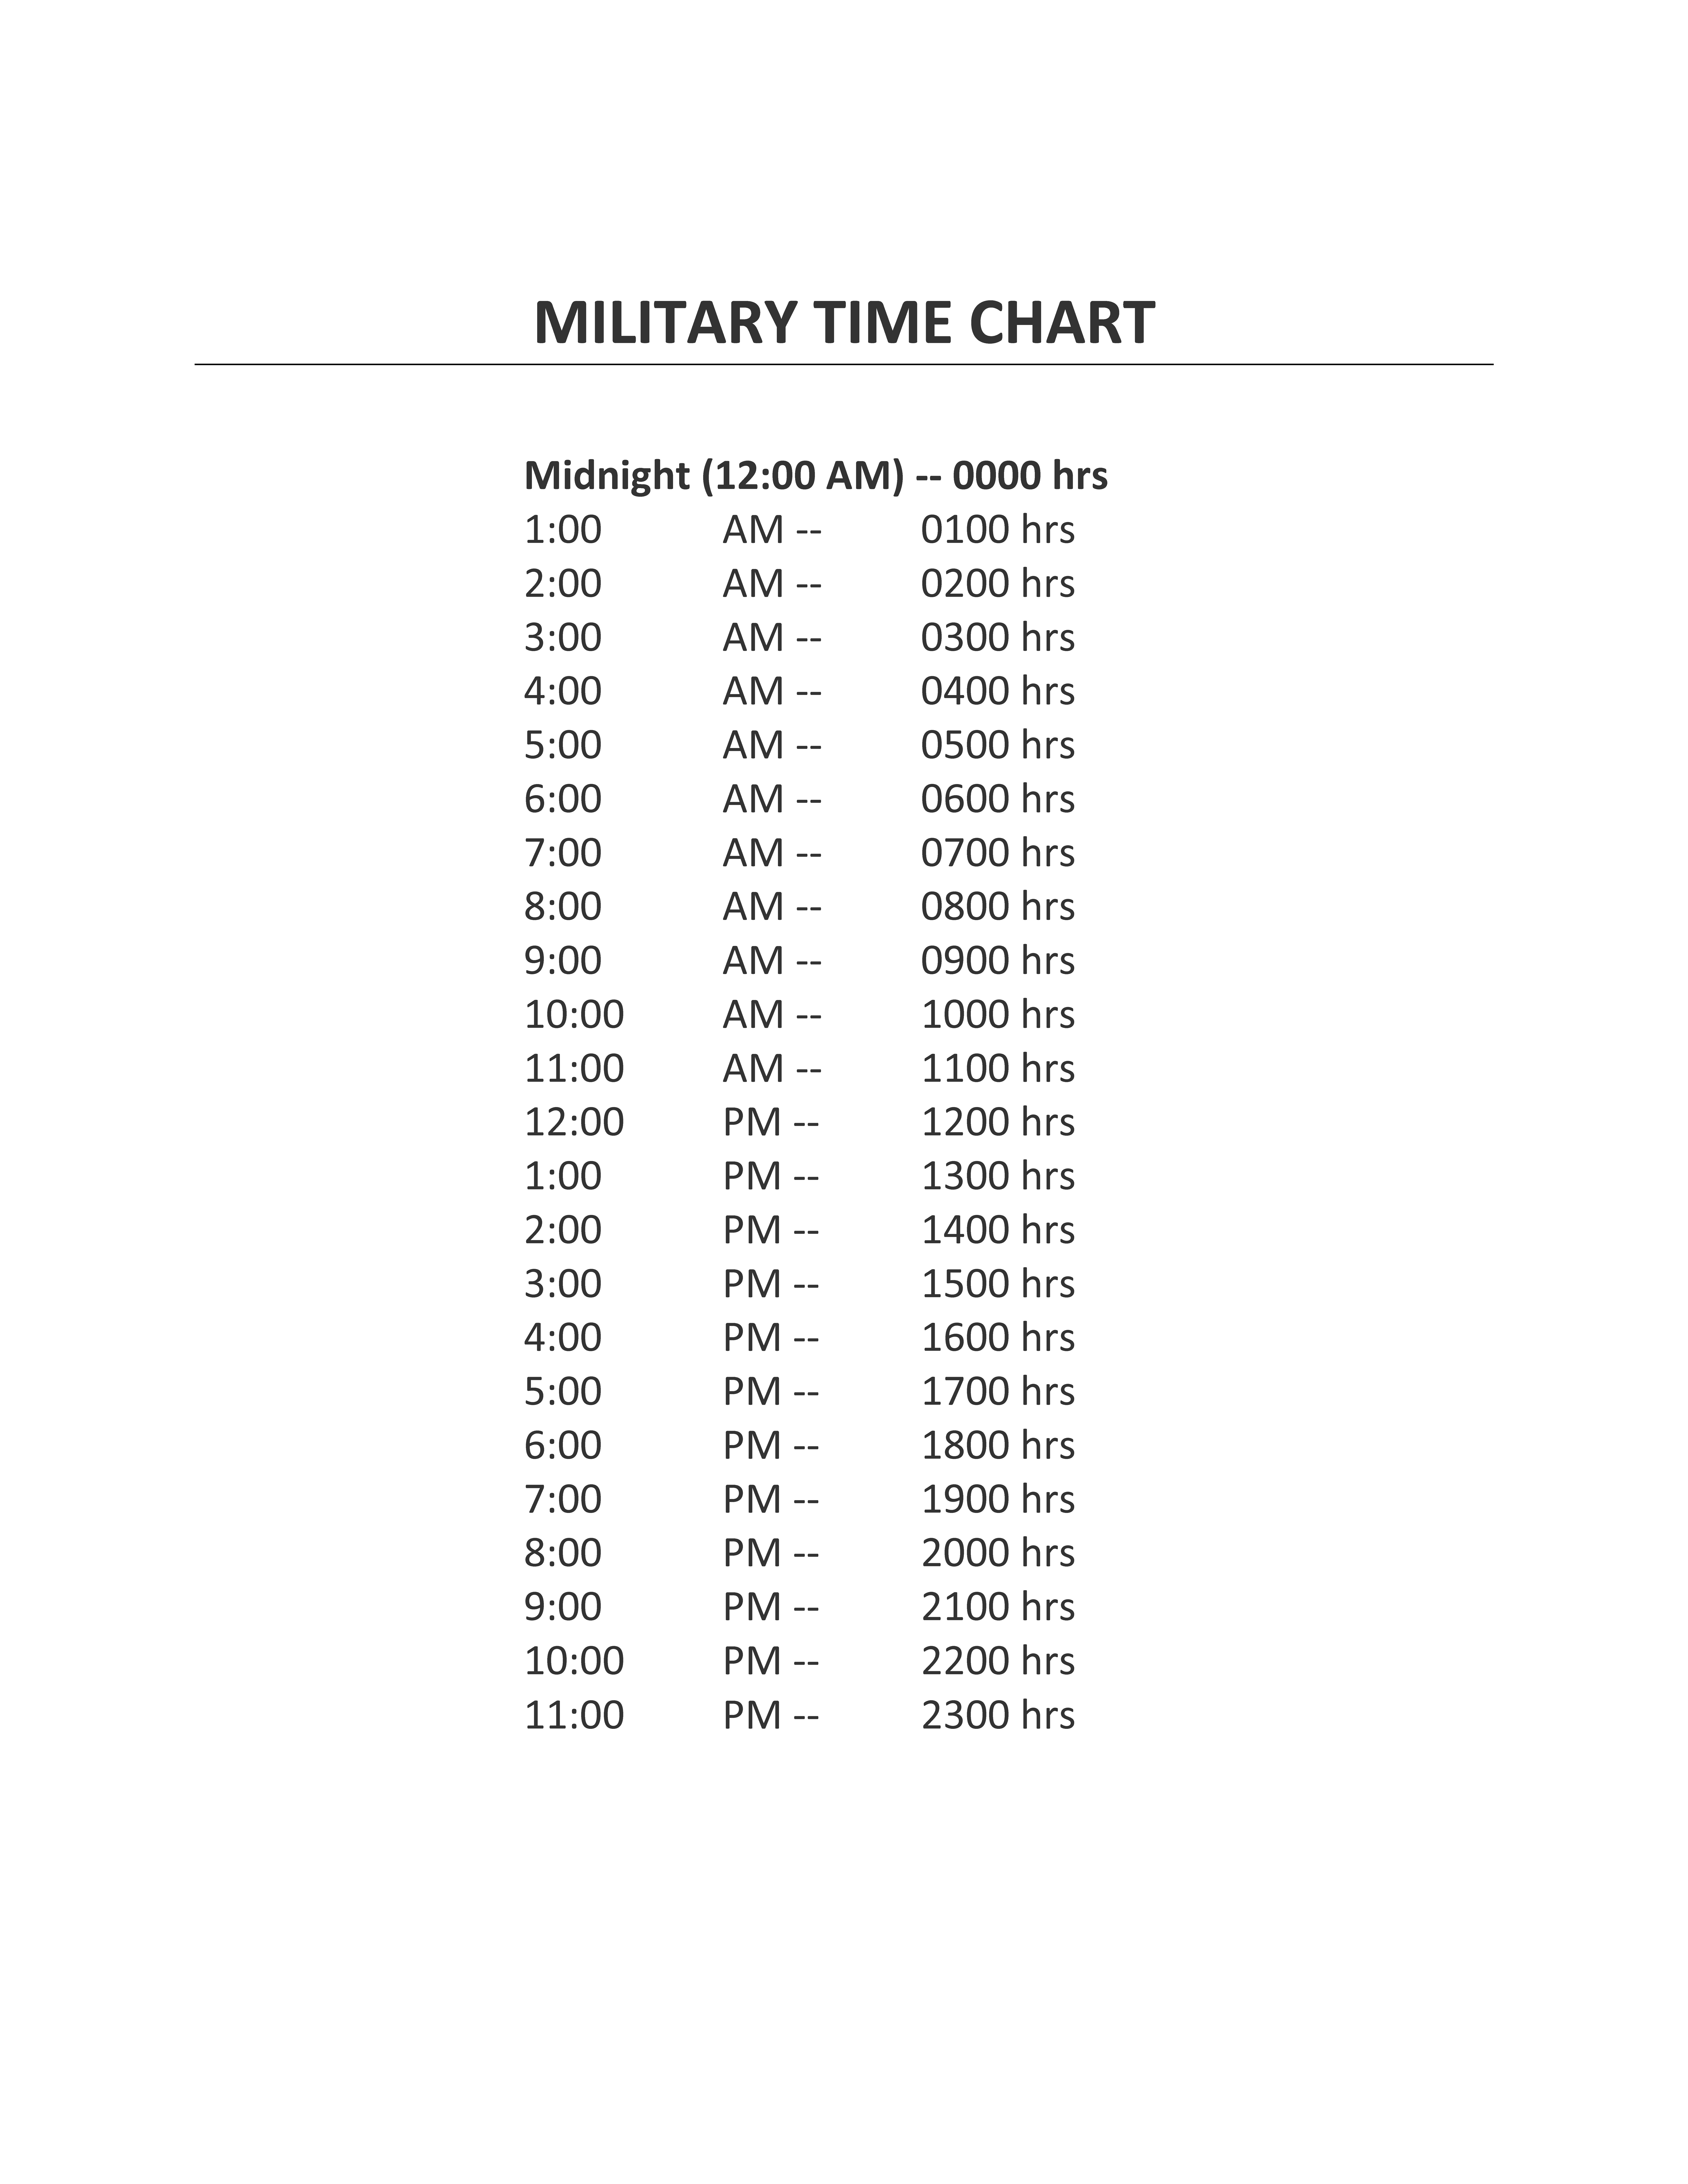 Army Time Chart main image